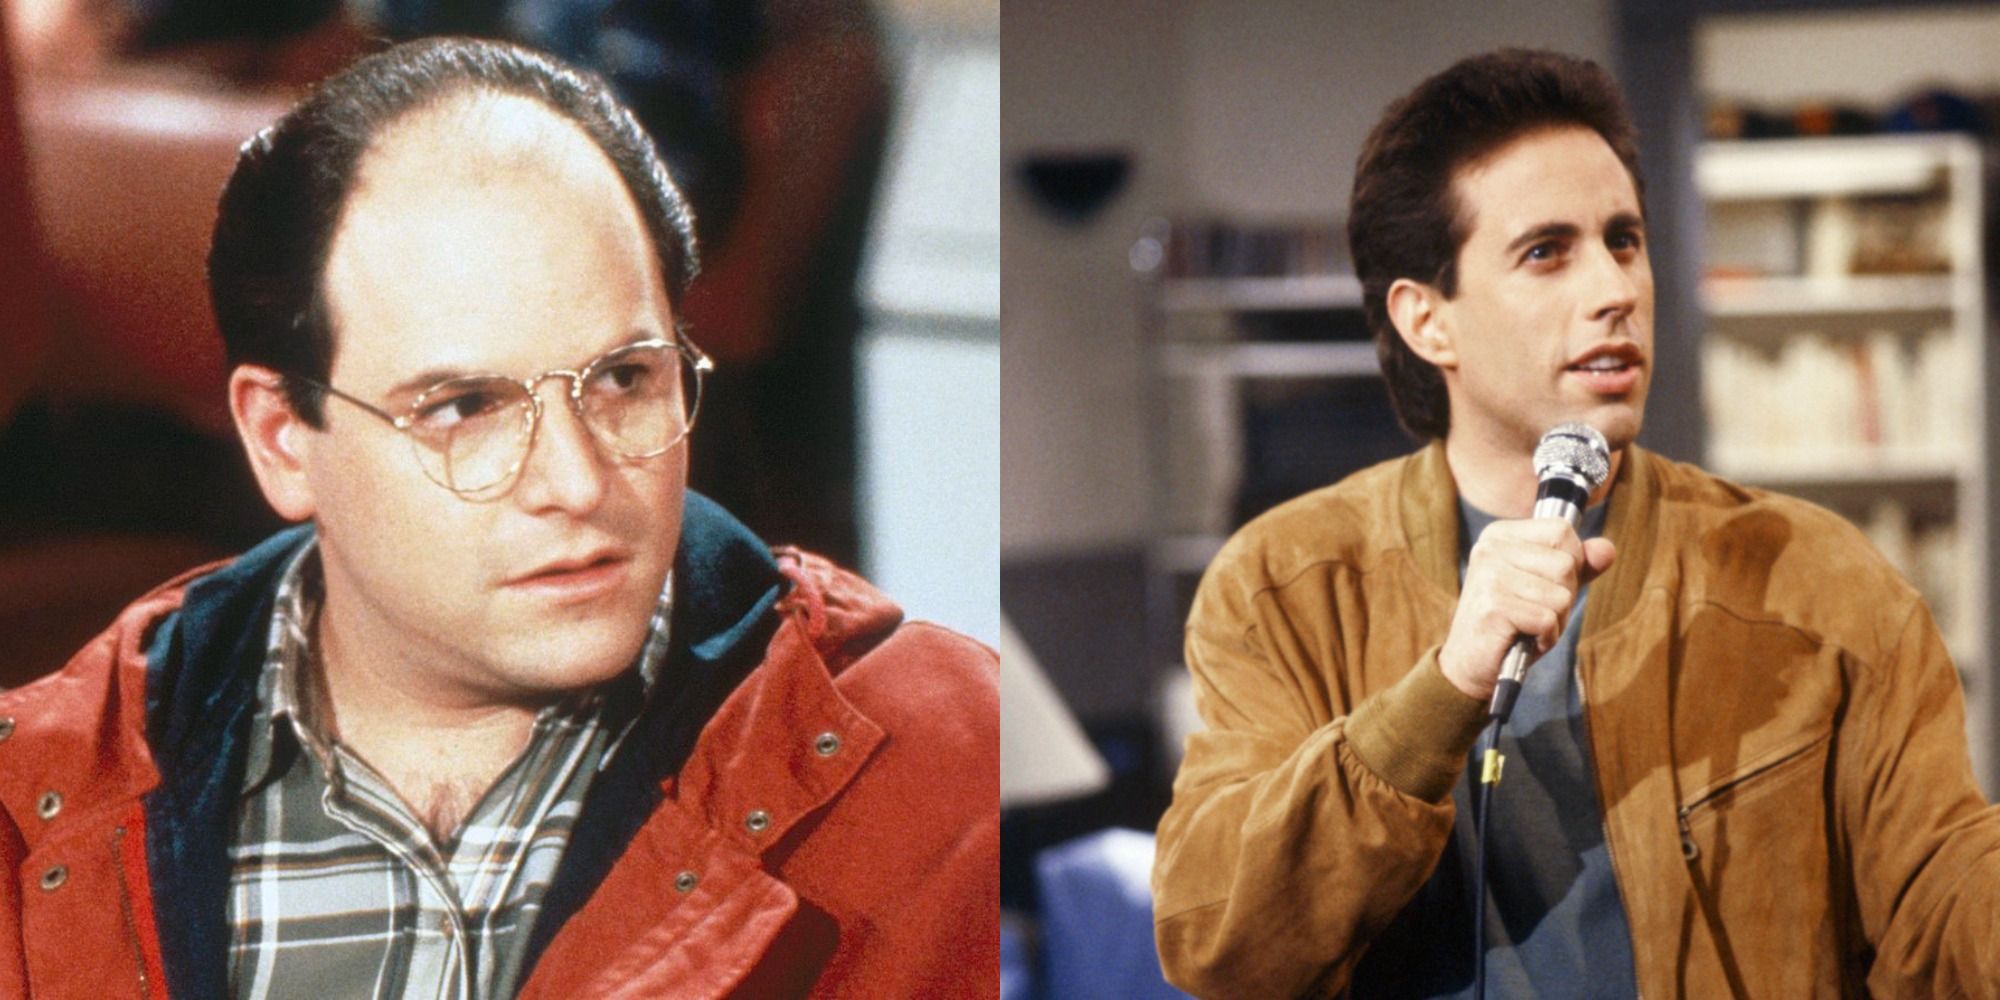 Split image showing George Costanza and Jerry in Seinfeld